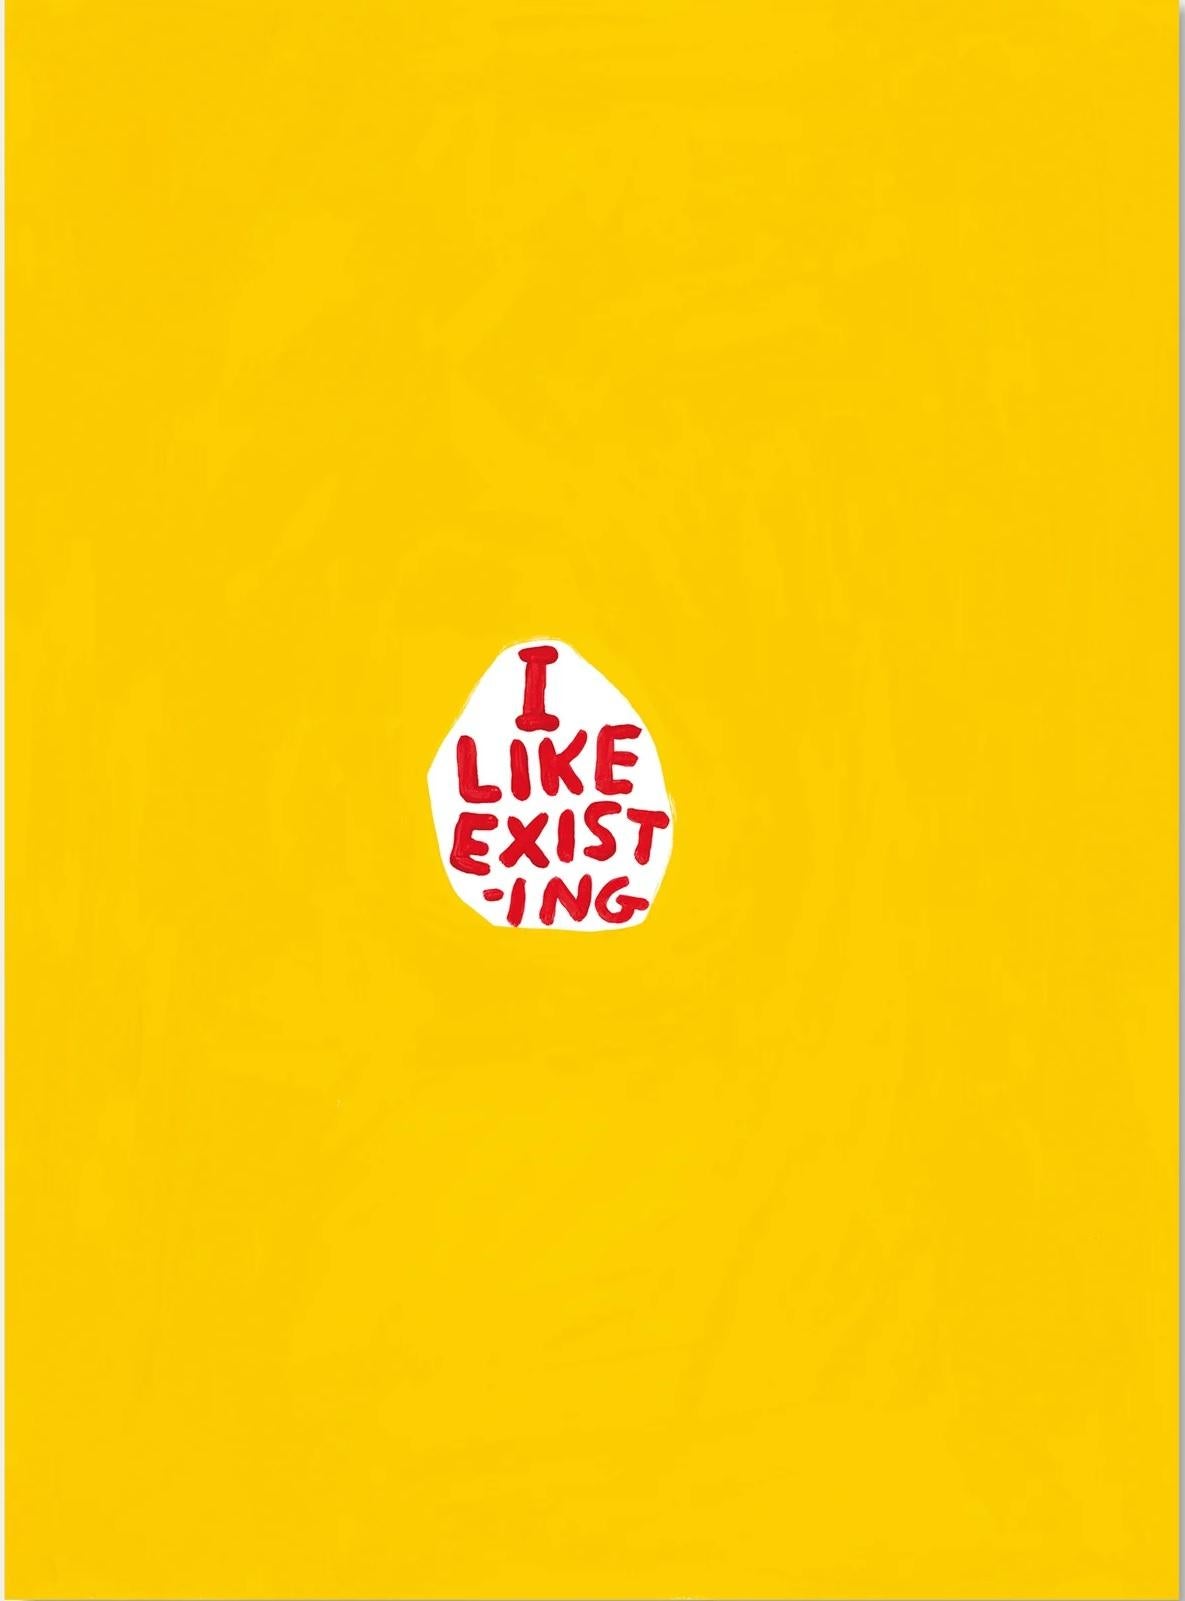 David Shrigley --  I like existing, 2022
70 x 50 cm
It is created from the unique work: Untitled ( I like existing) (2021)
Printed on 200g Munken Lynx paper
Printed by Narayana Press in Denmark
Unnumbered from the Edition of 250
Unsigned 
Free